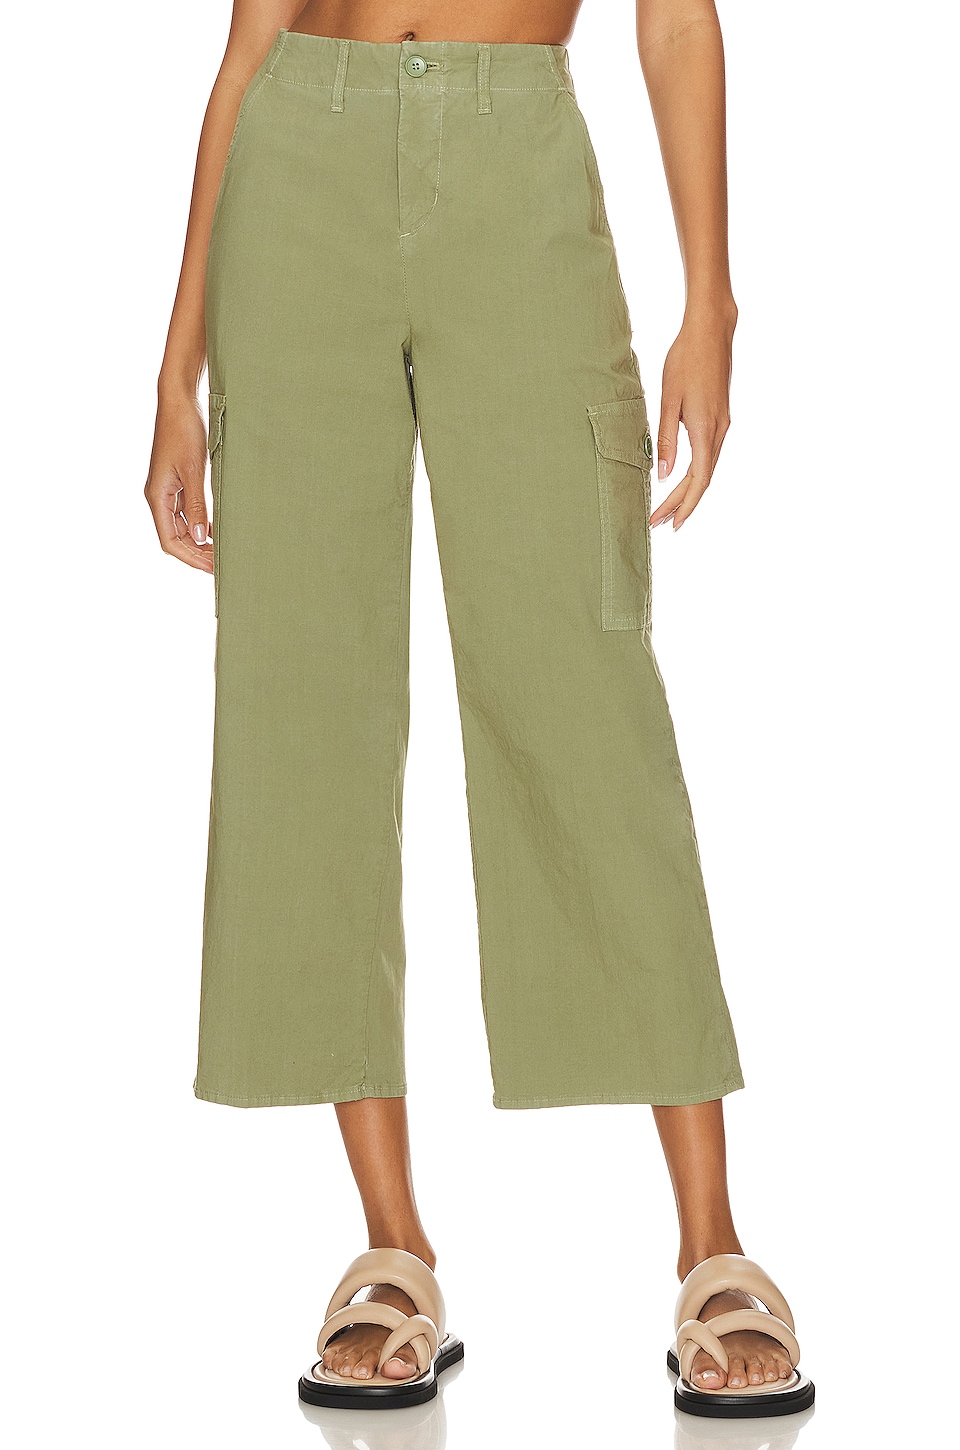 L'AGENCE Zoella Cargo Pant in Soft Army